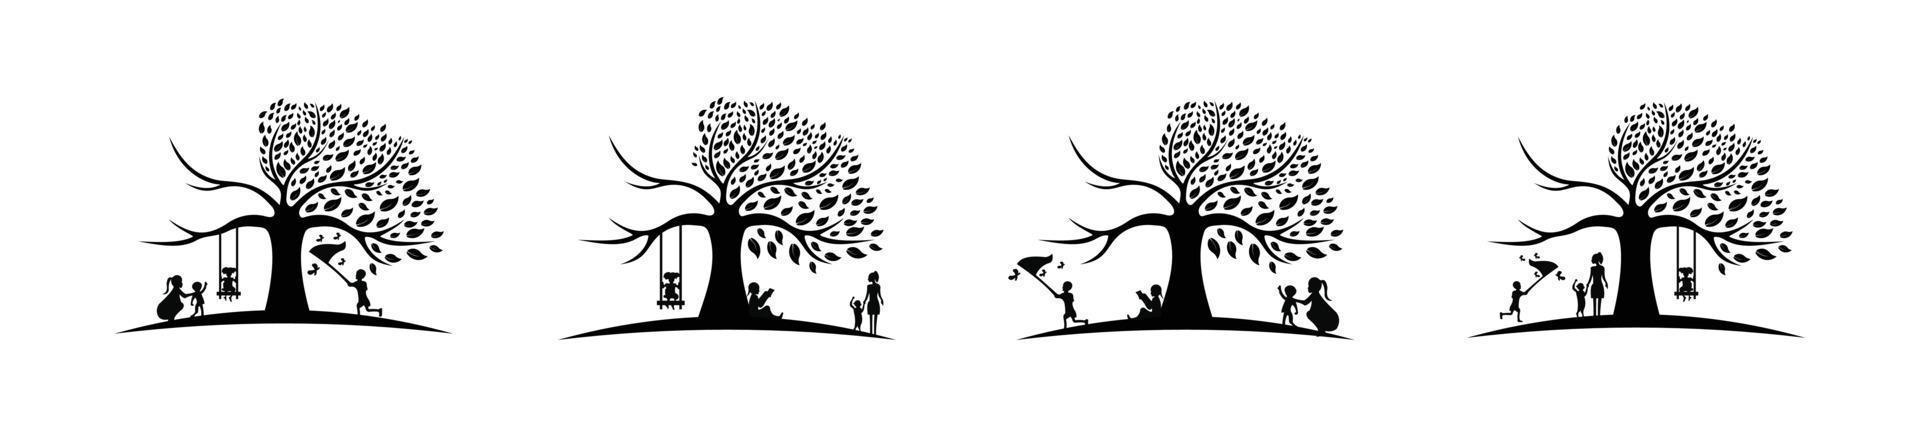 children and mothers play under the tree, black oak tree logo and roots design vector illustration